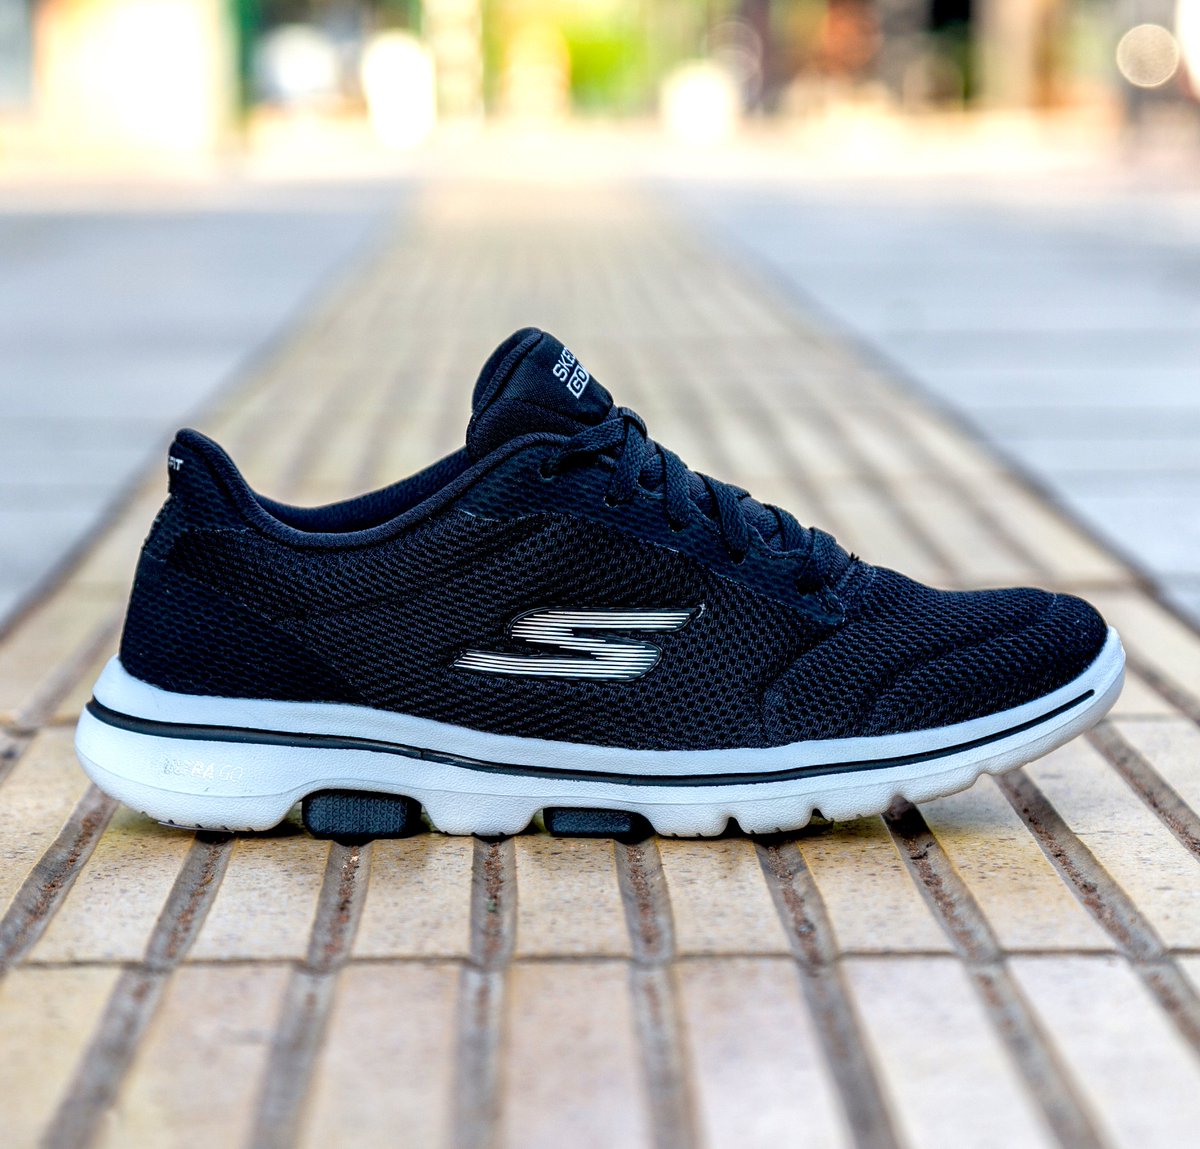 skechers shoes bd price